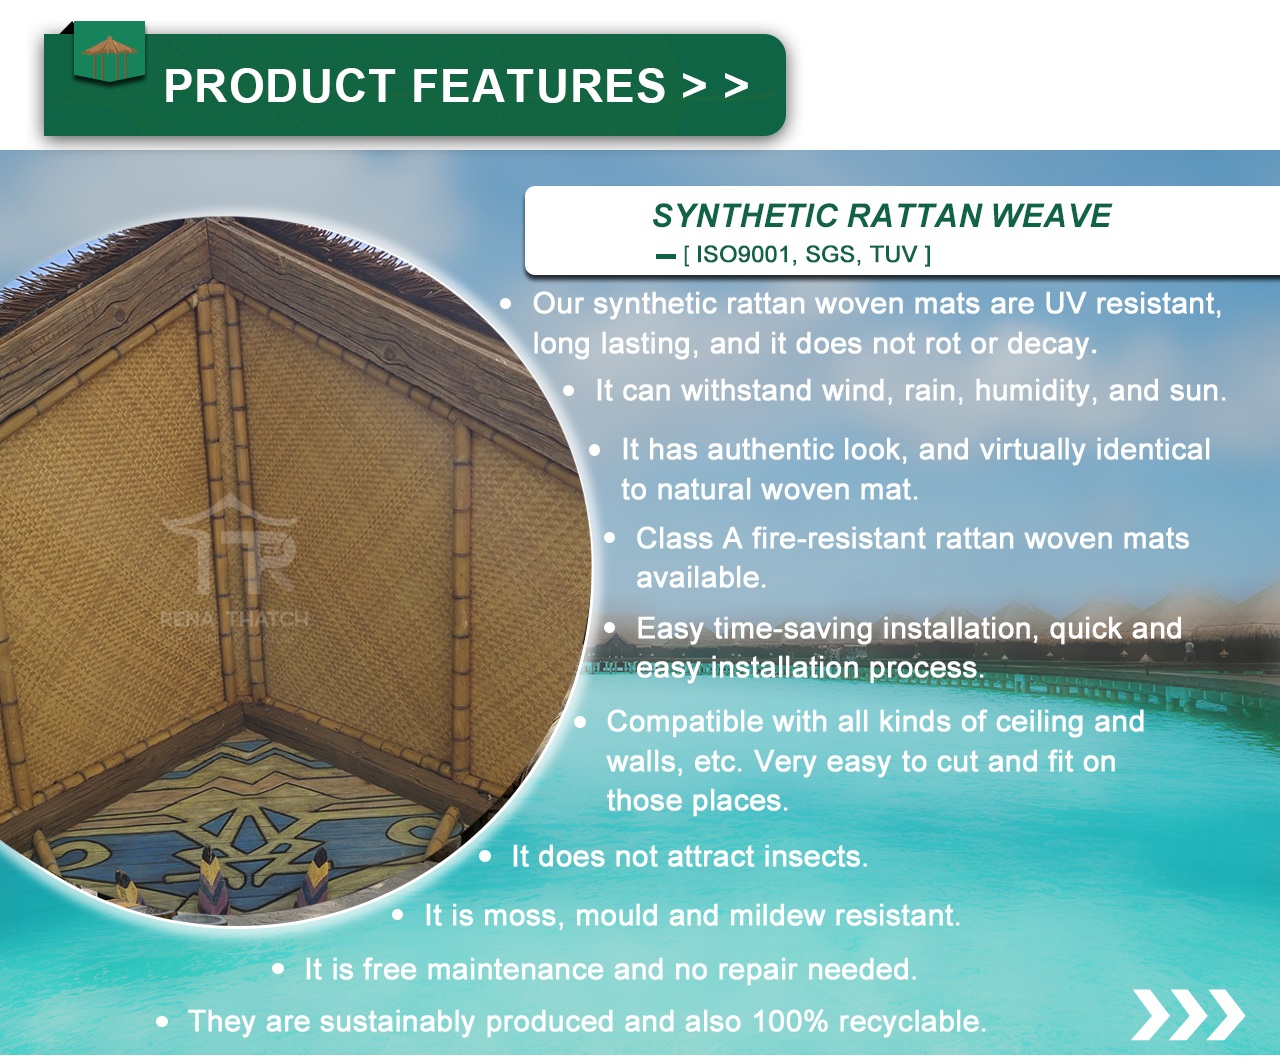 Synthetic Rattan Weave